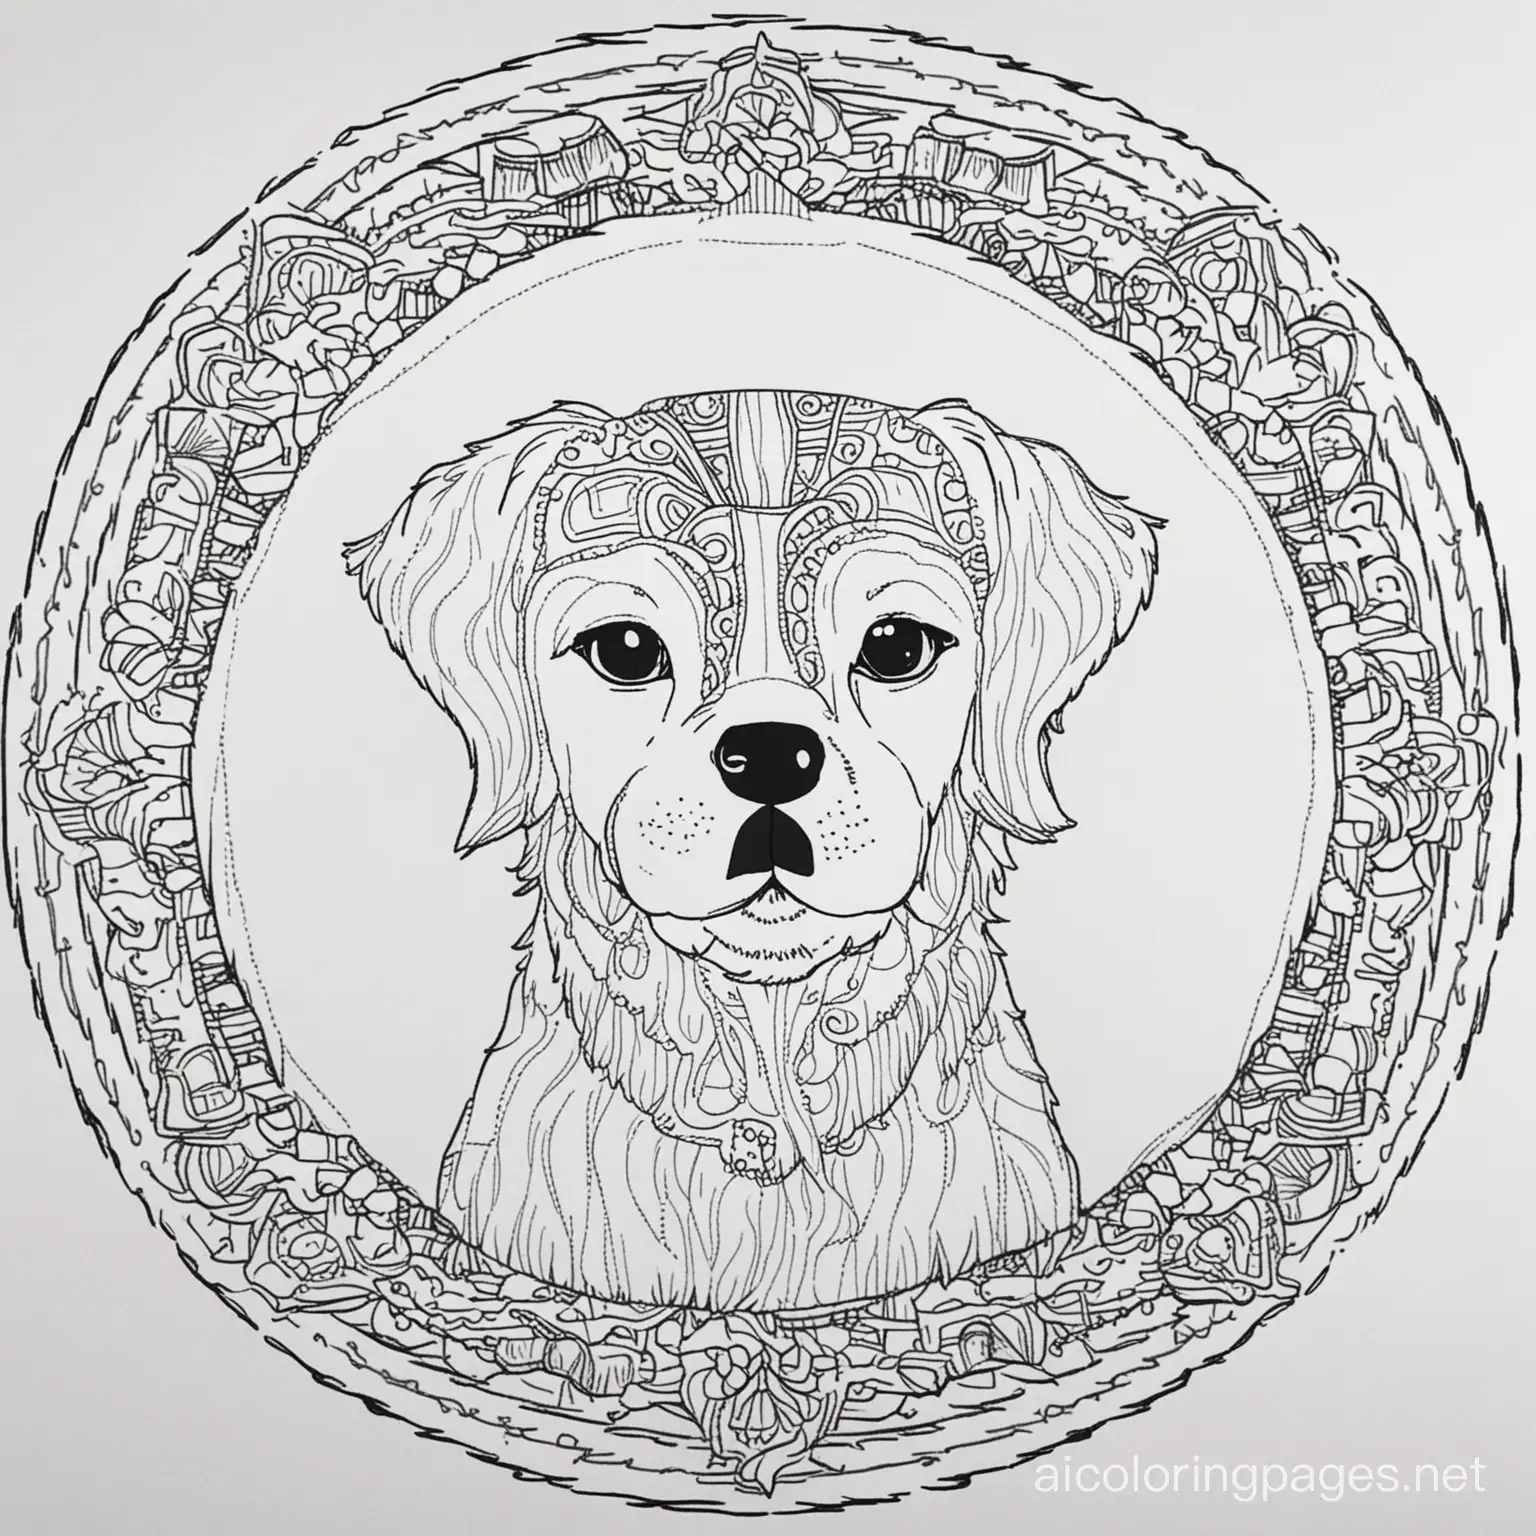 Dog mandalas

, Coloring Page, black and white, line art, white background, Simplicity, Ample White Space. The background of the coloring page is plain white to make it easy for young children to color within the lines. The outlines of all the subjects are easy to distinguish, making it simple for kids to color without too much difficulty